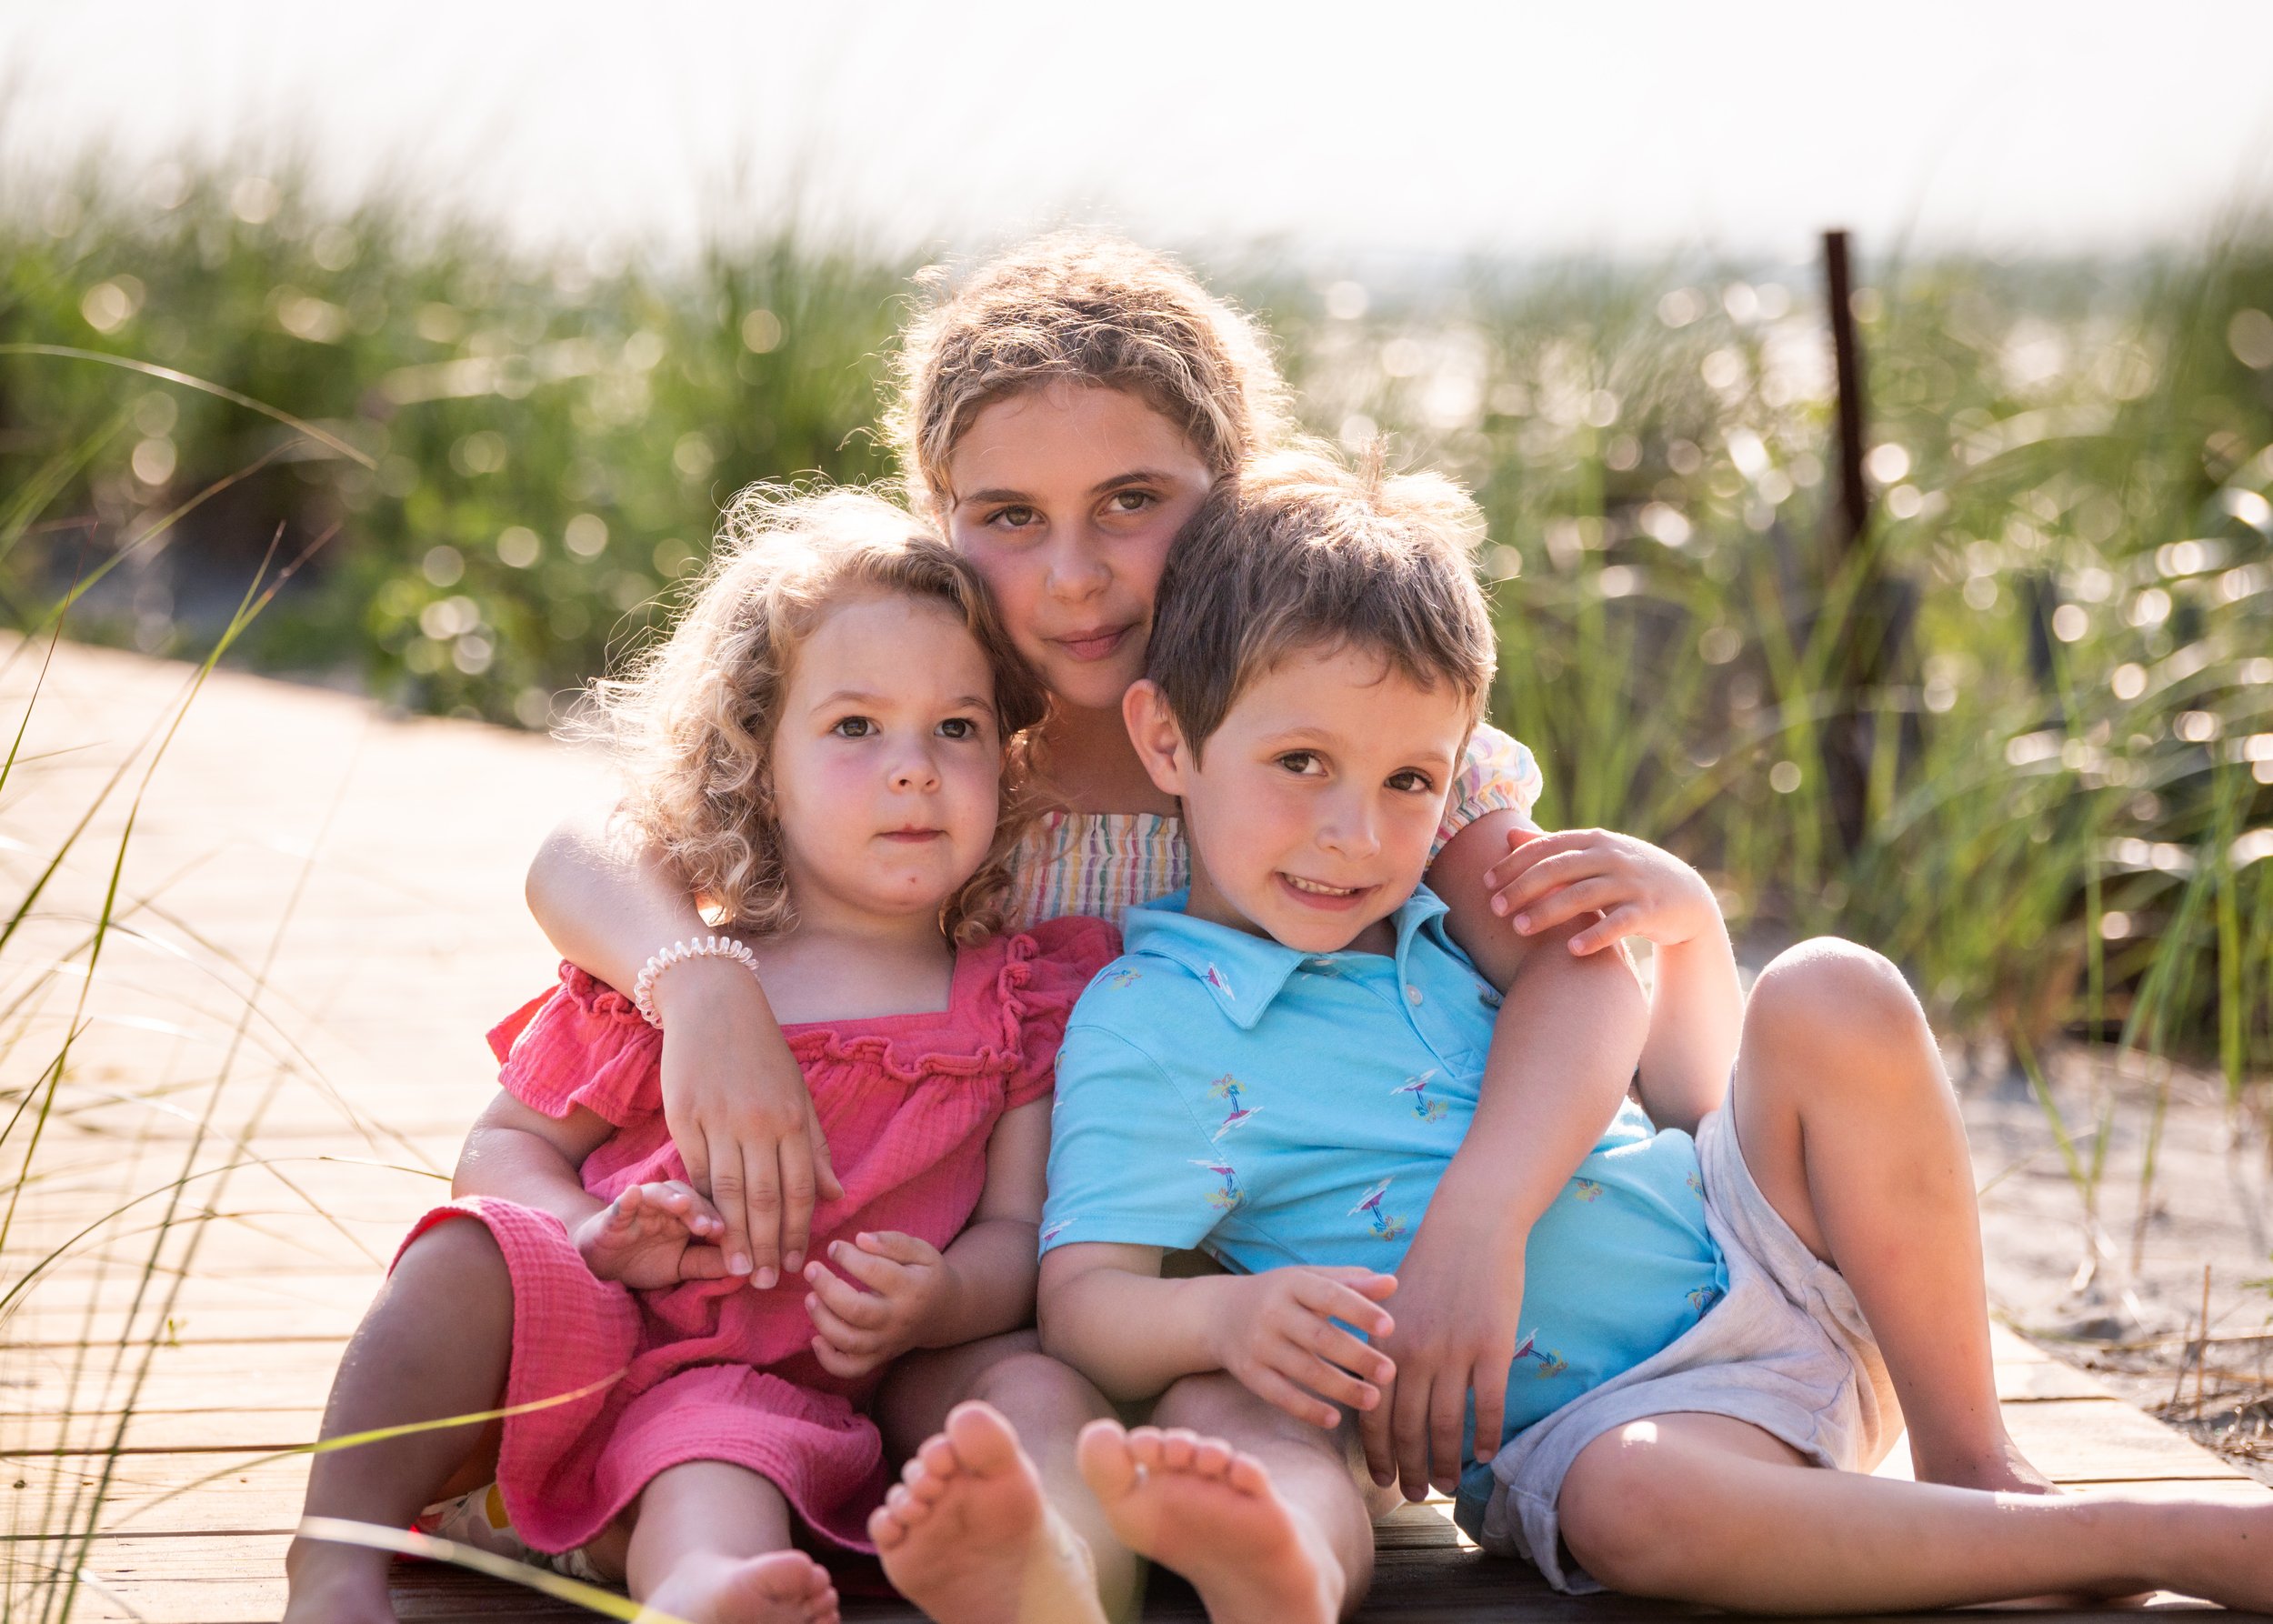 lindsay murphy photography | portland maine family photographer | siblings portrait prouts neck.jpg